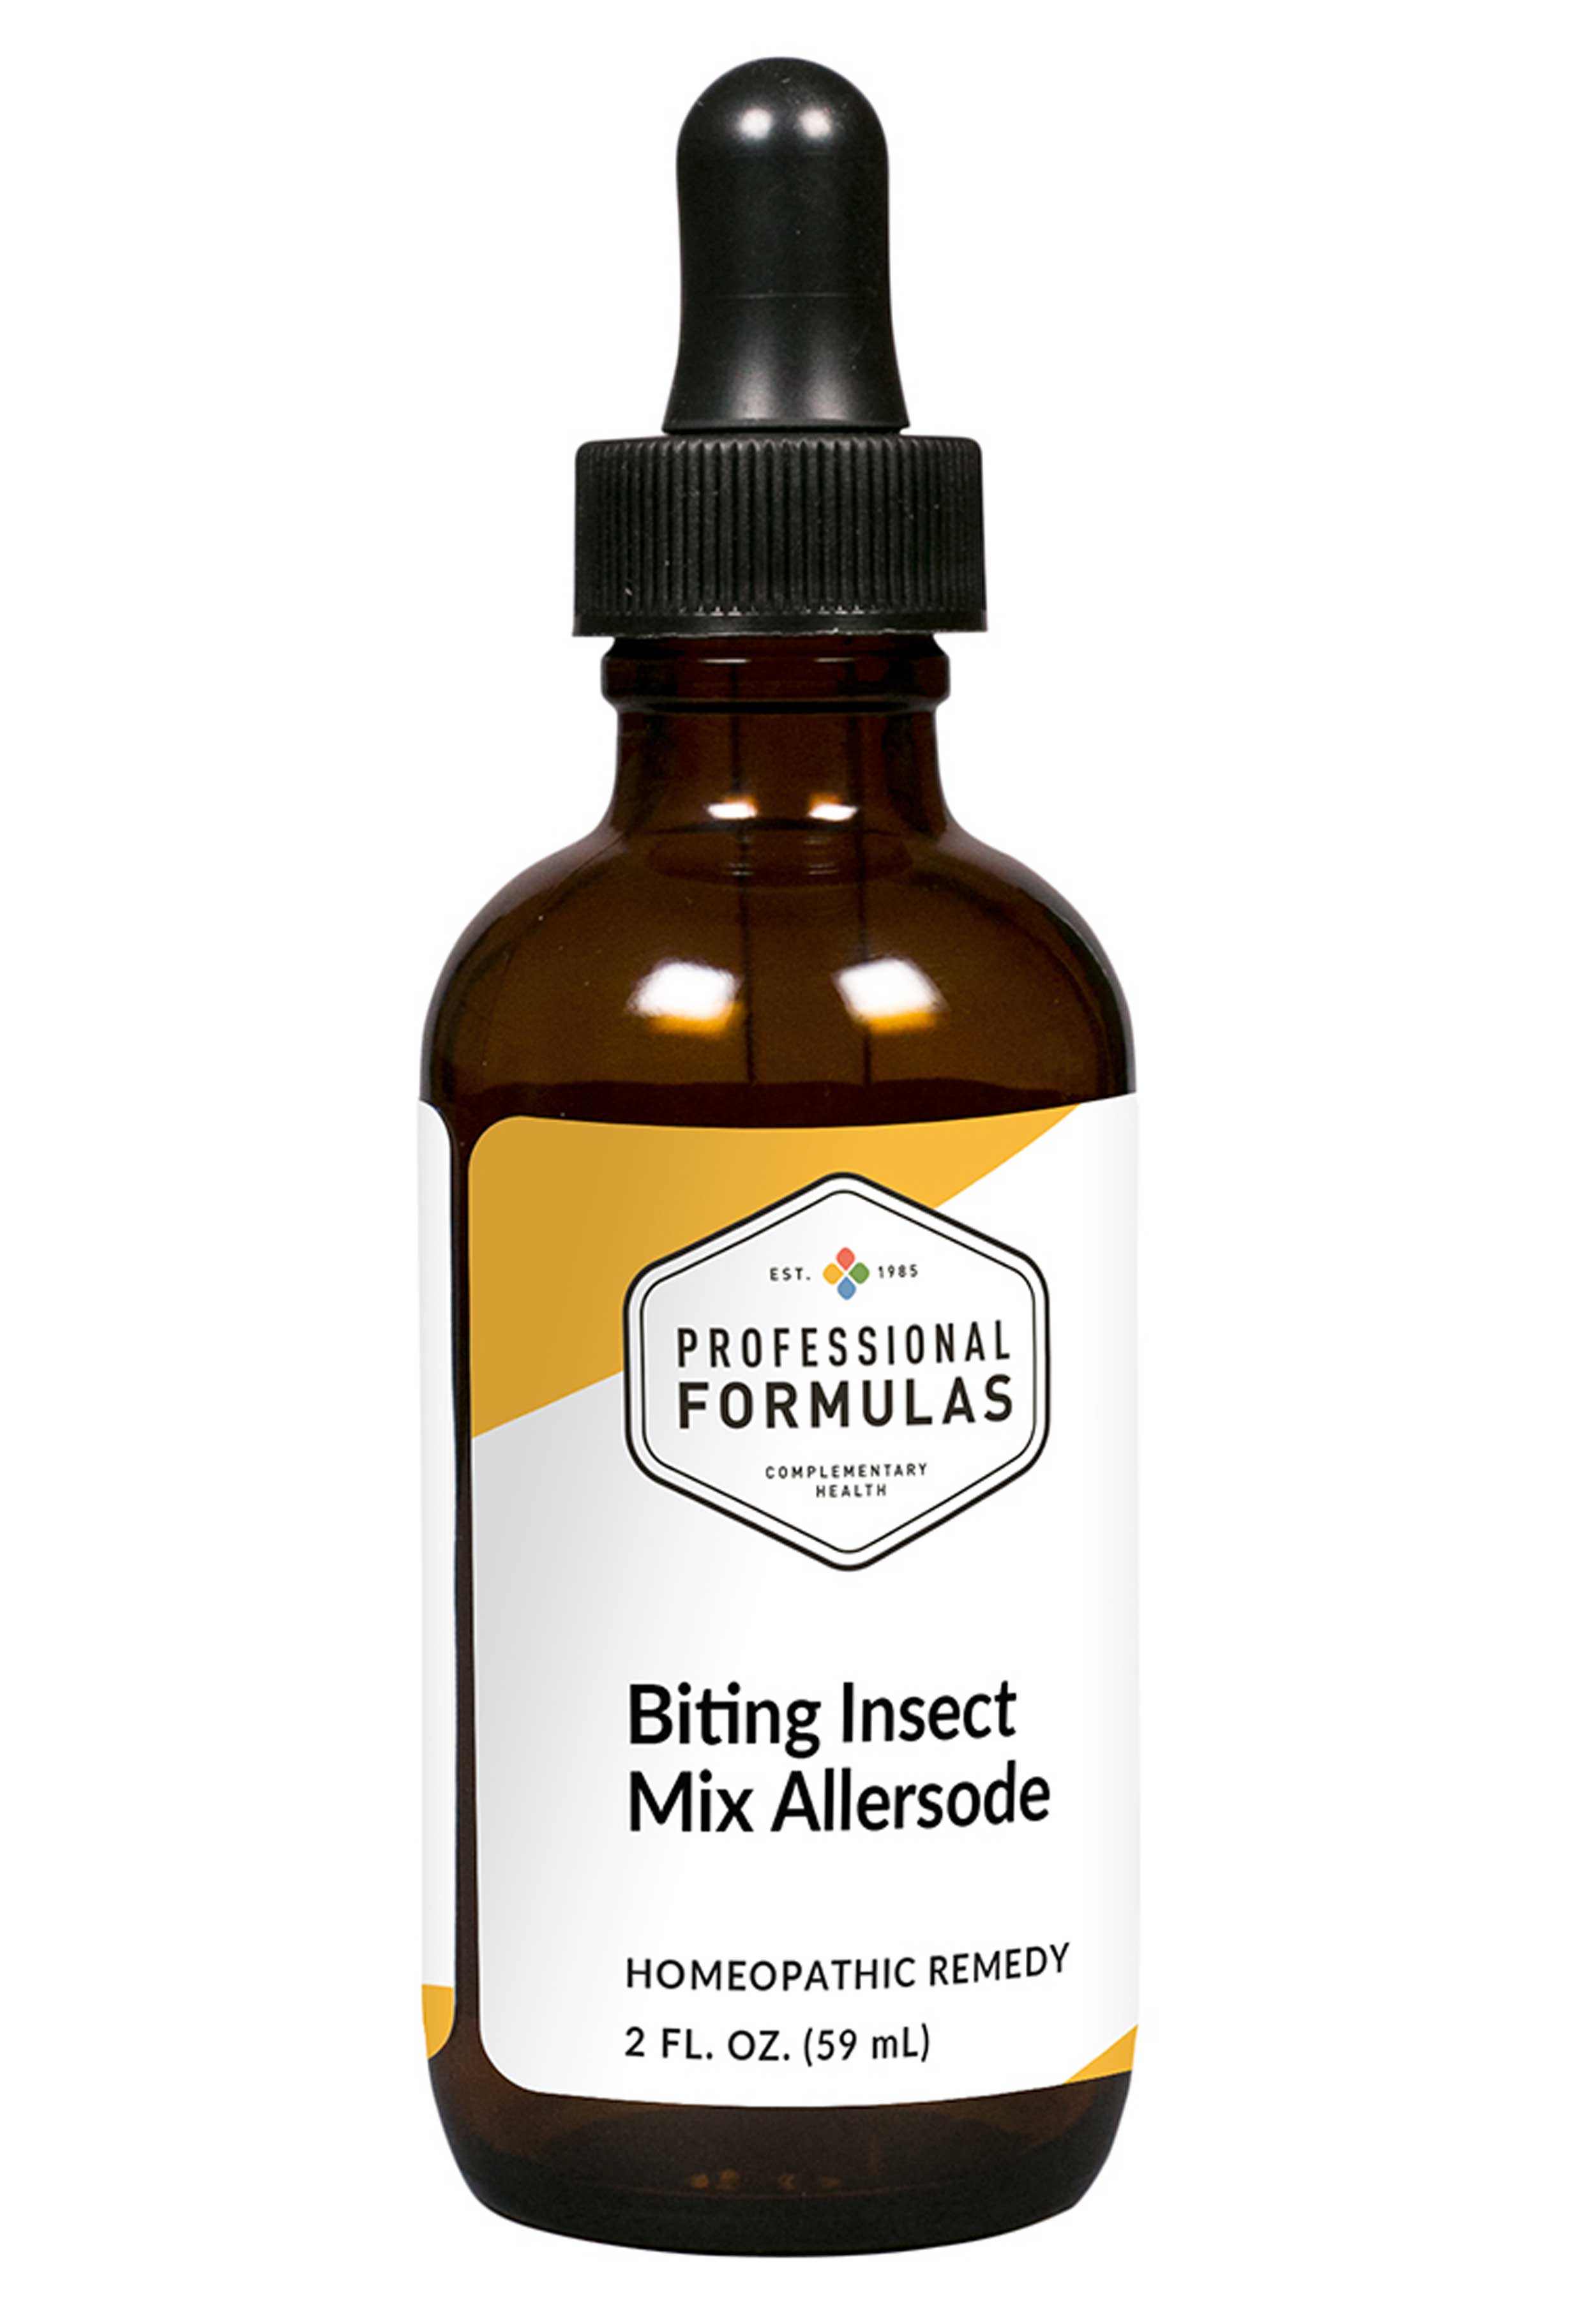 Professional Formulas Biting Insect Mix Allersode